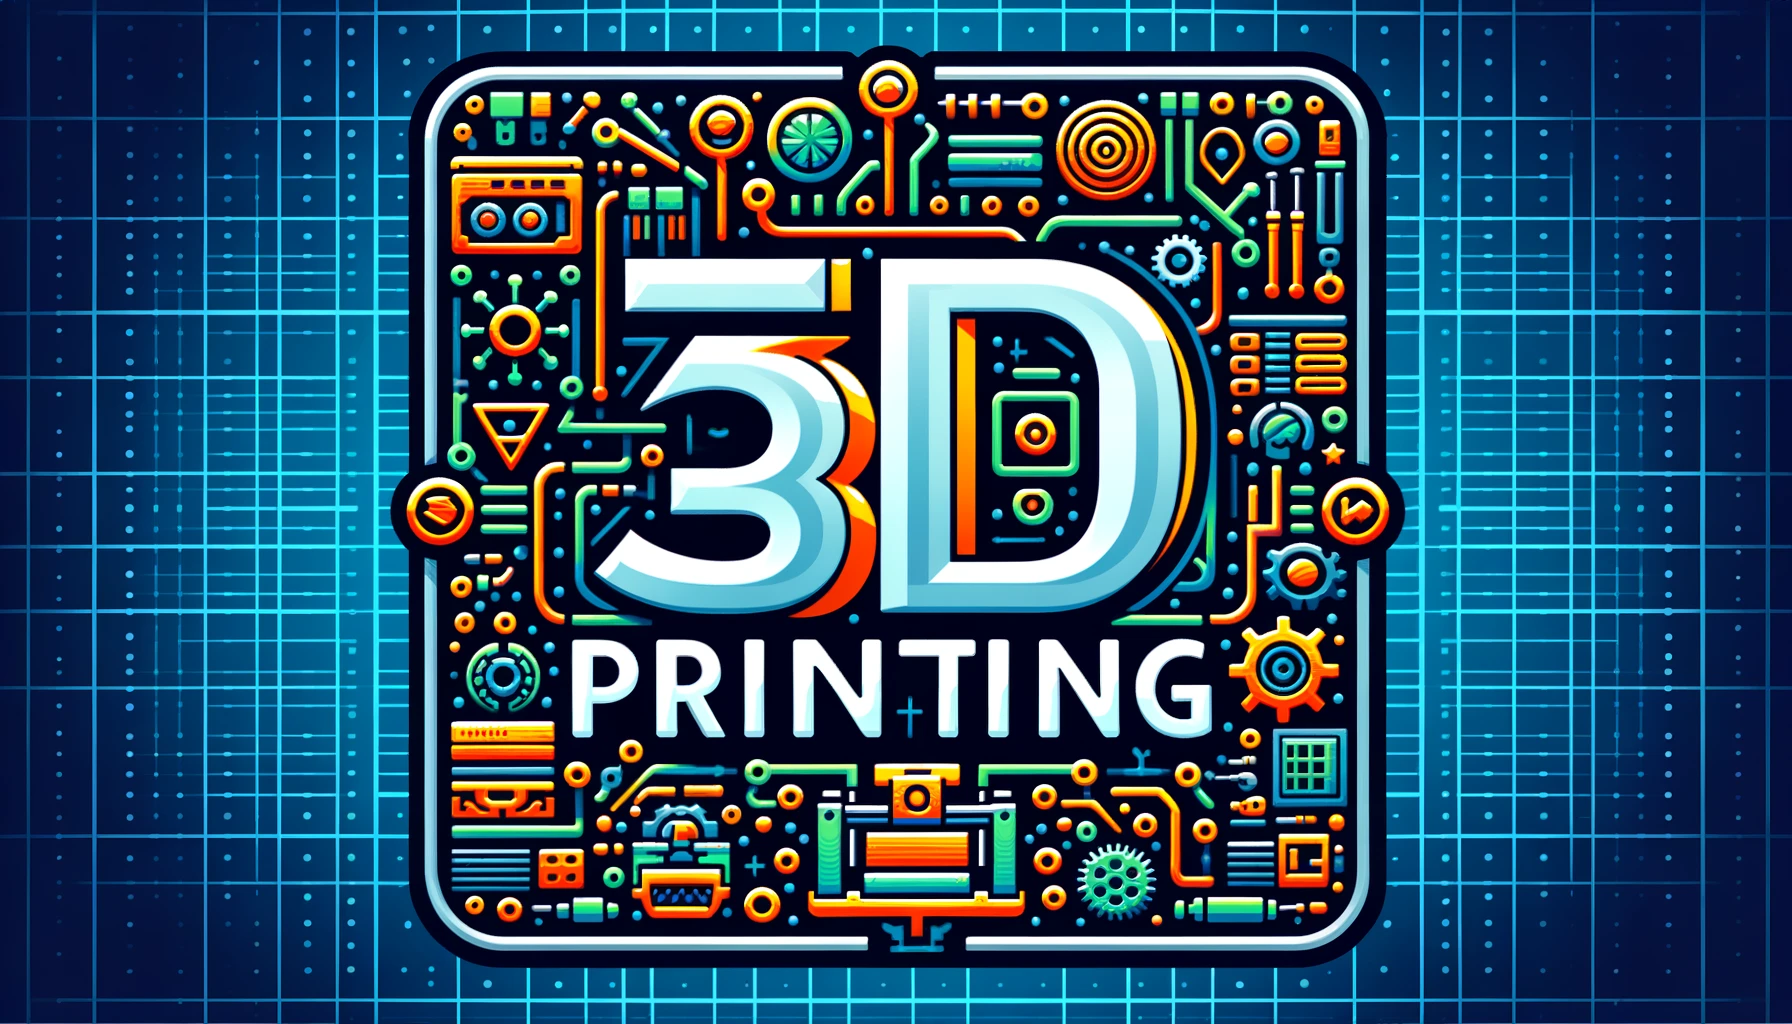 DALL·E 2023-11-07 17.25.21 - Create a vibrant, rectangular logo that prominently features the phrase '3D Printing' in a clear and bold font suitable for a 3D printing service. The